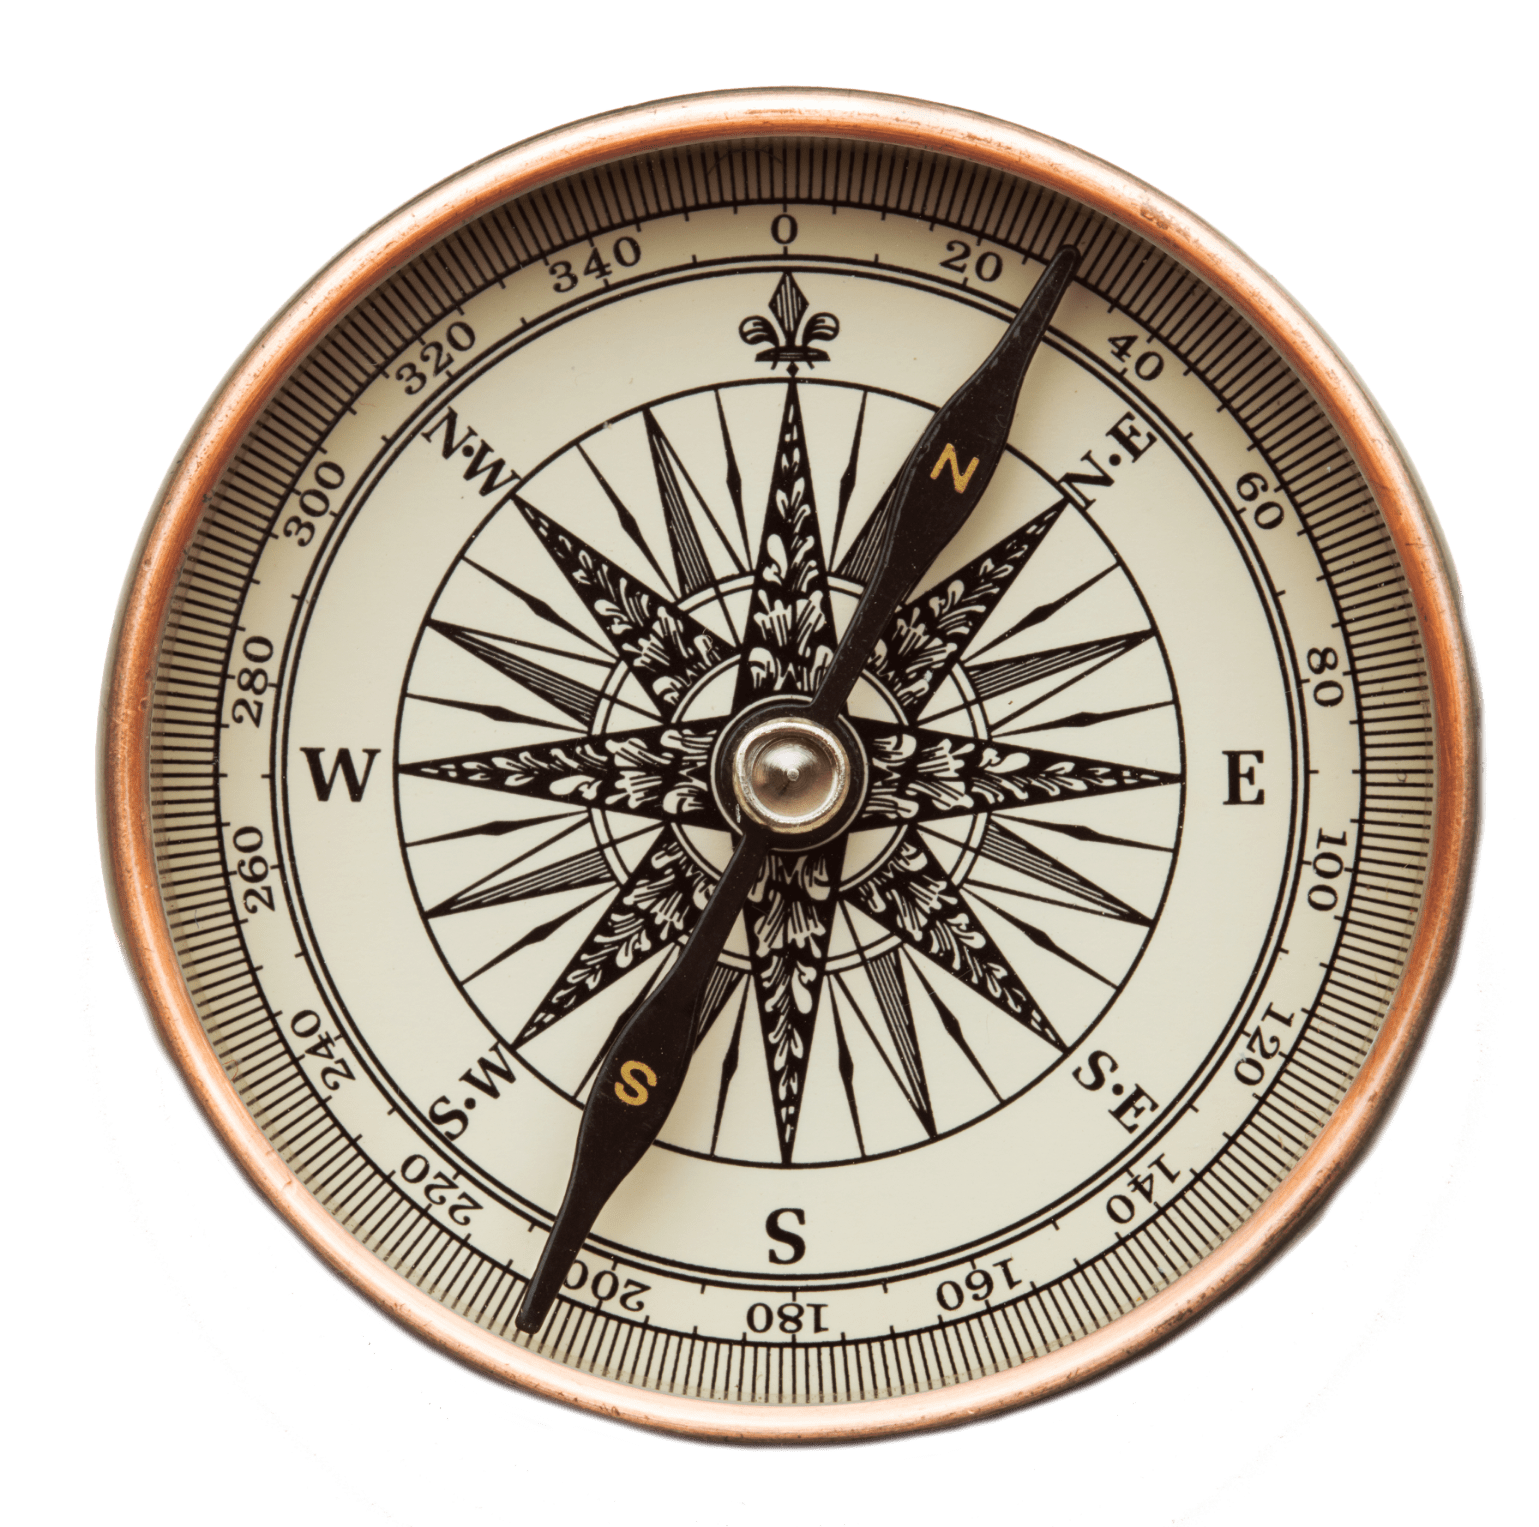 Find your marketing compass